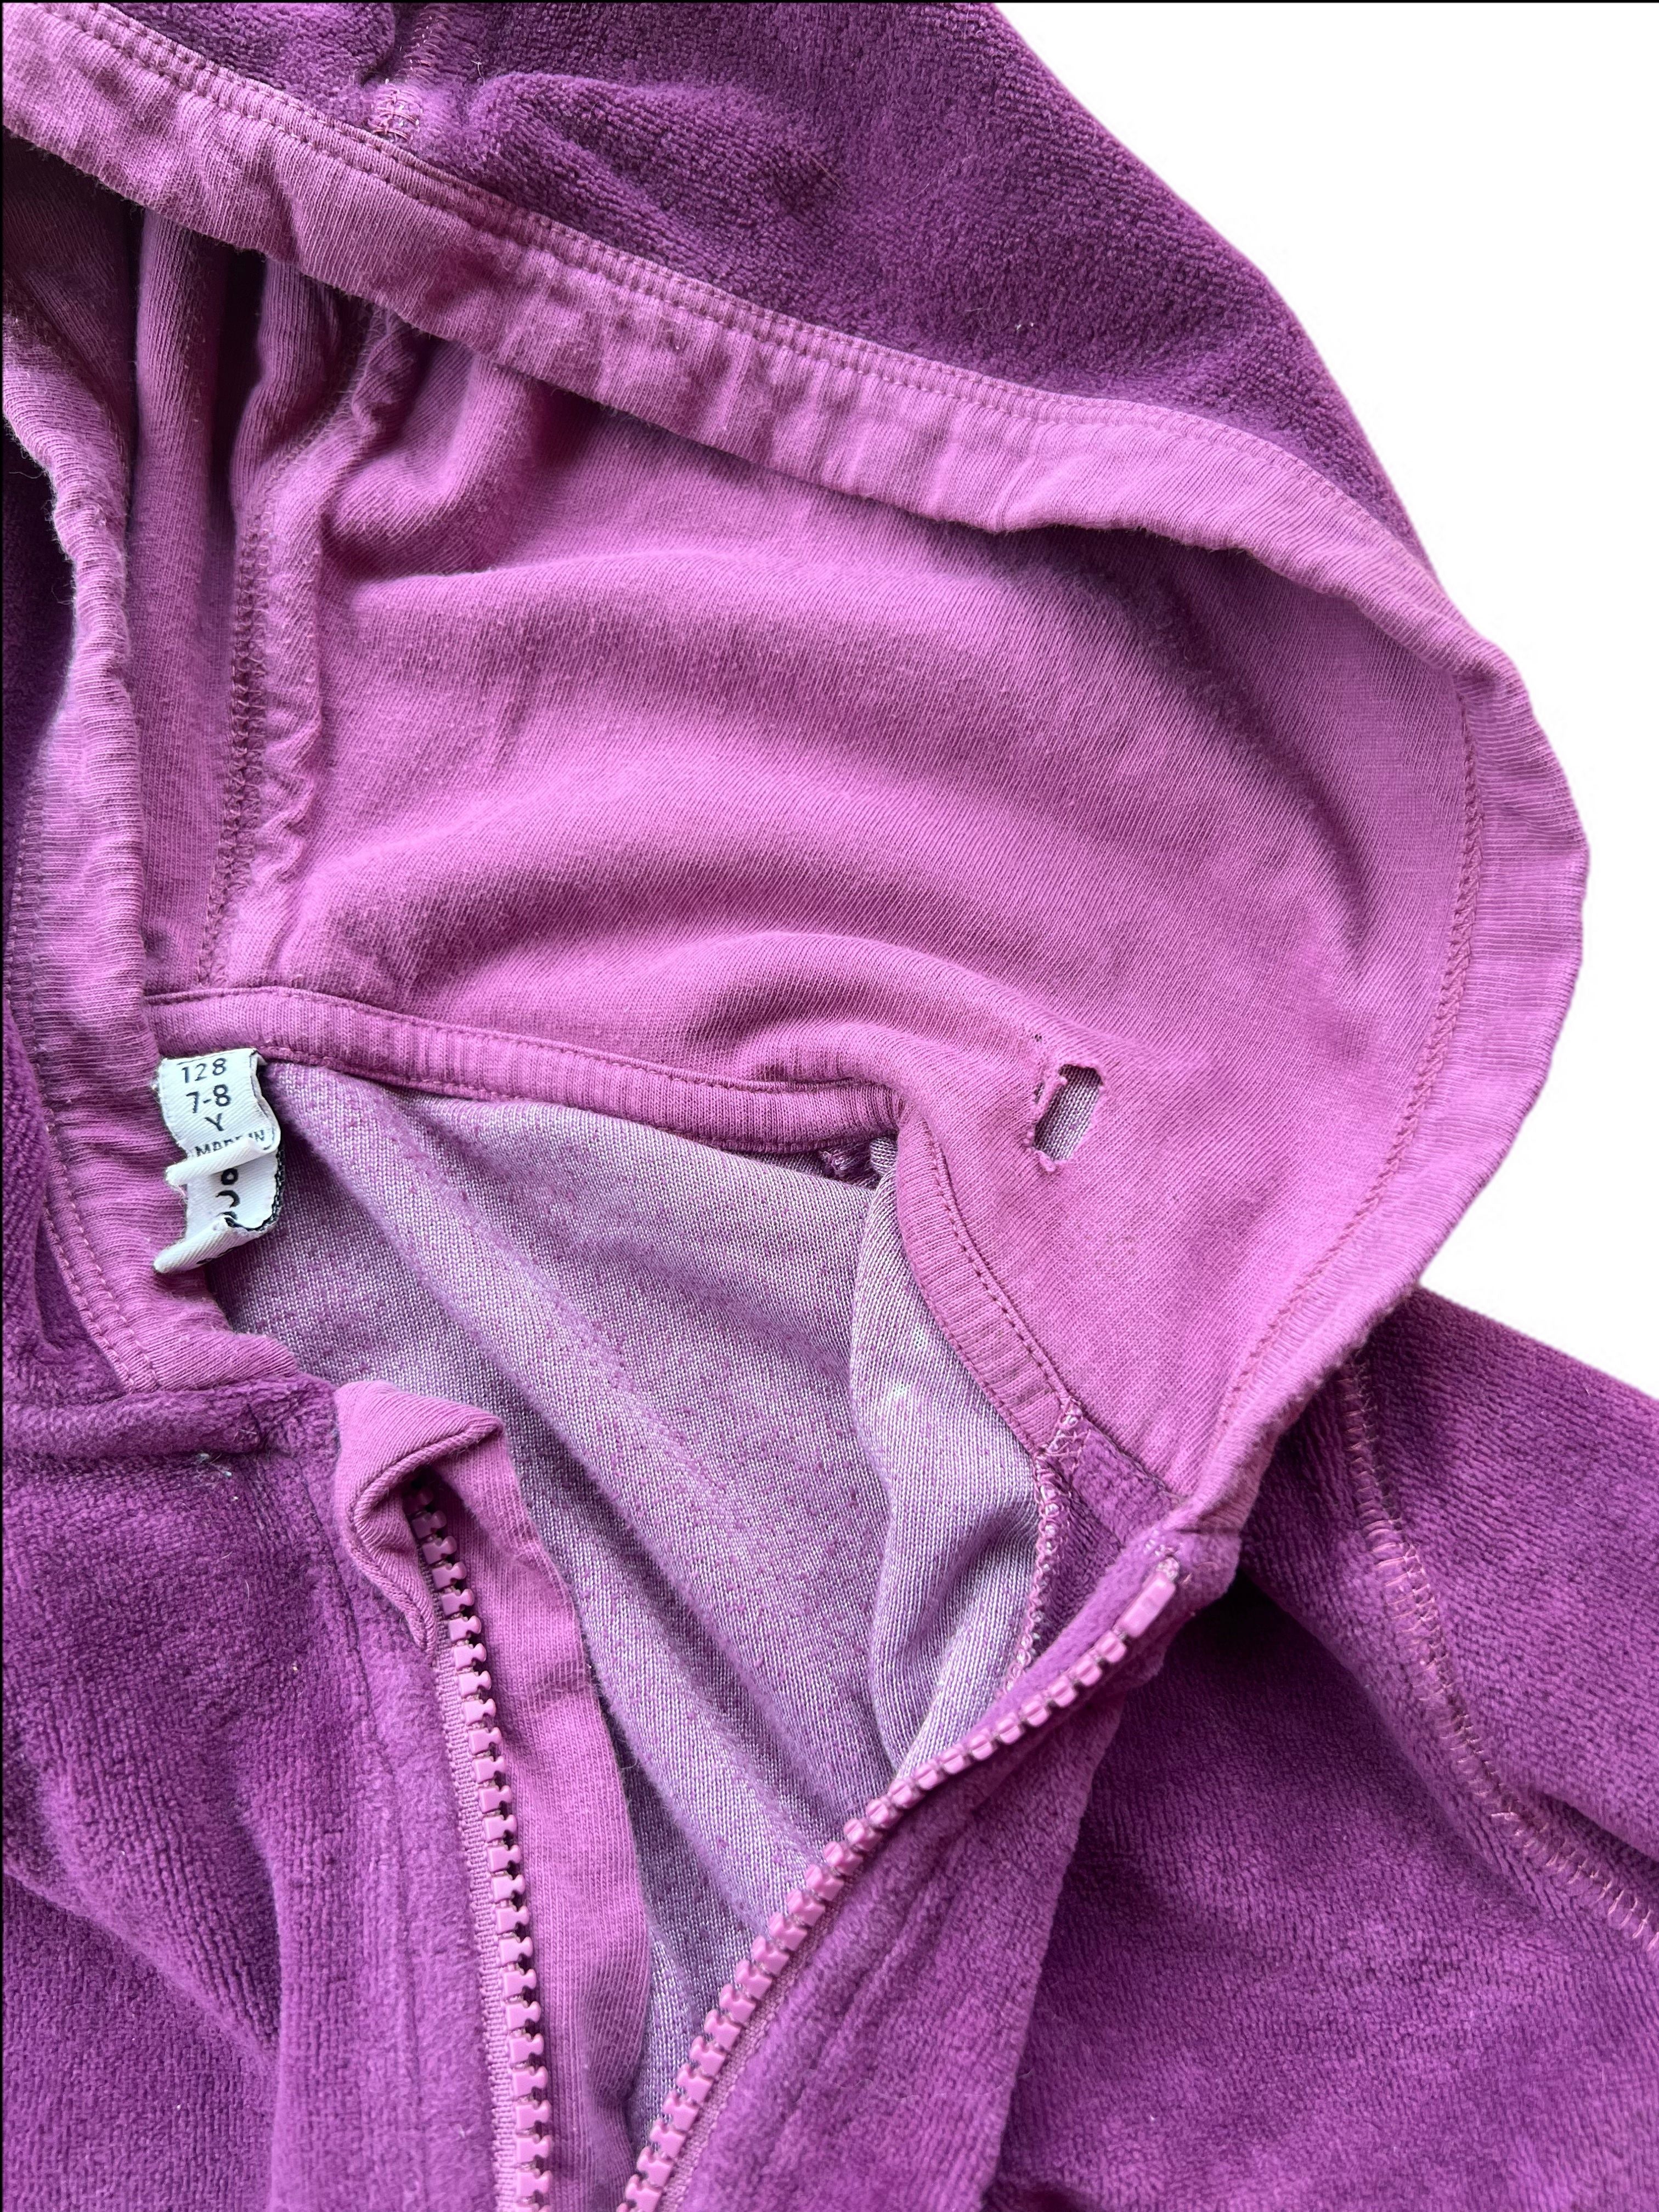 Velour Zip Hoodie, Small hole in hood and some wear marks